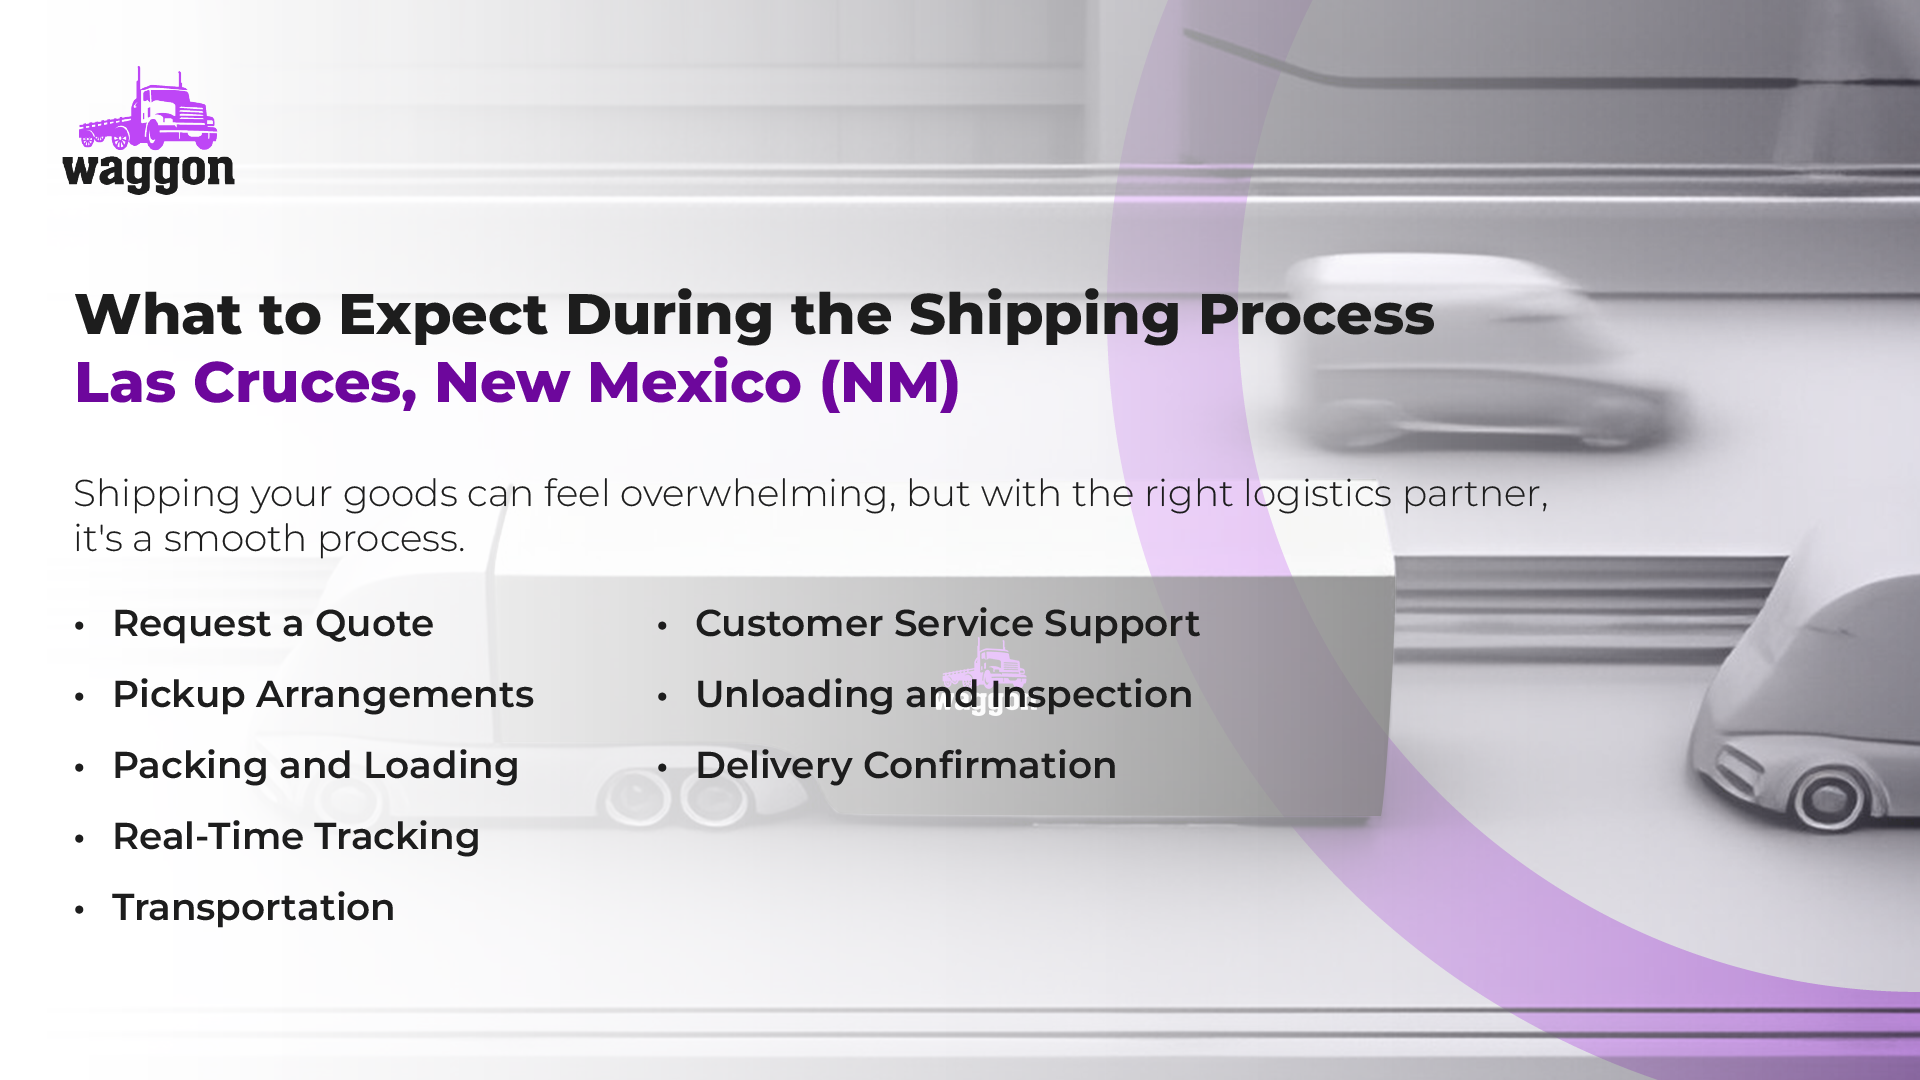 What to Expect During the Shipping Process